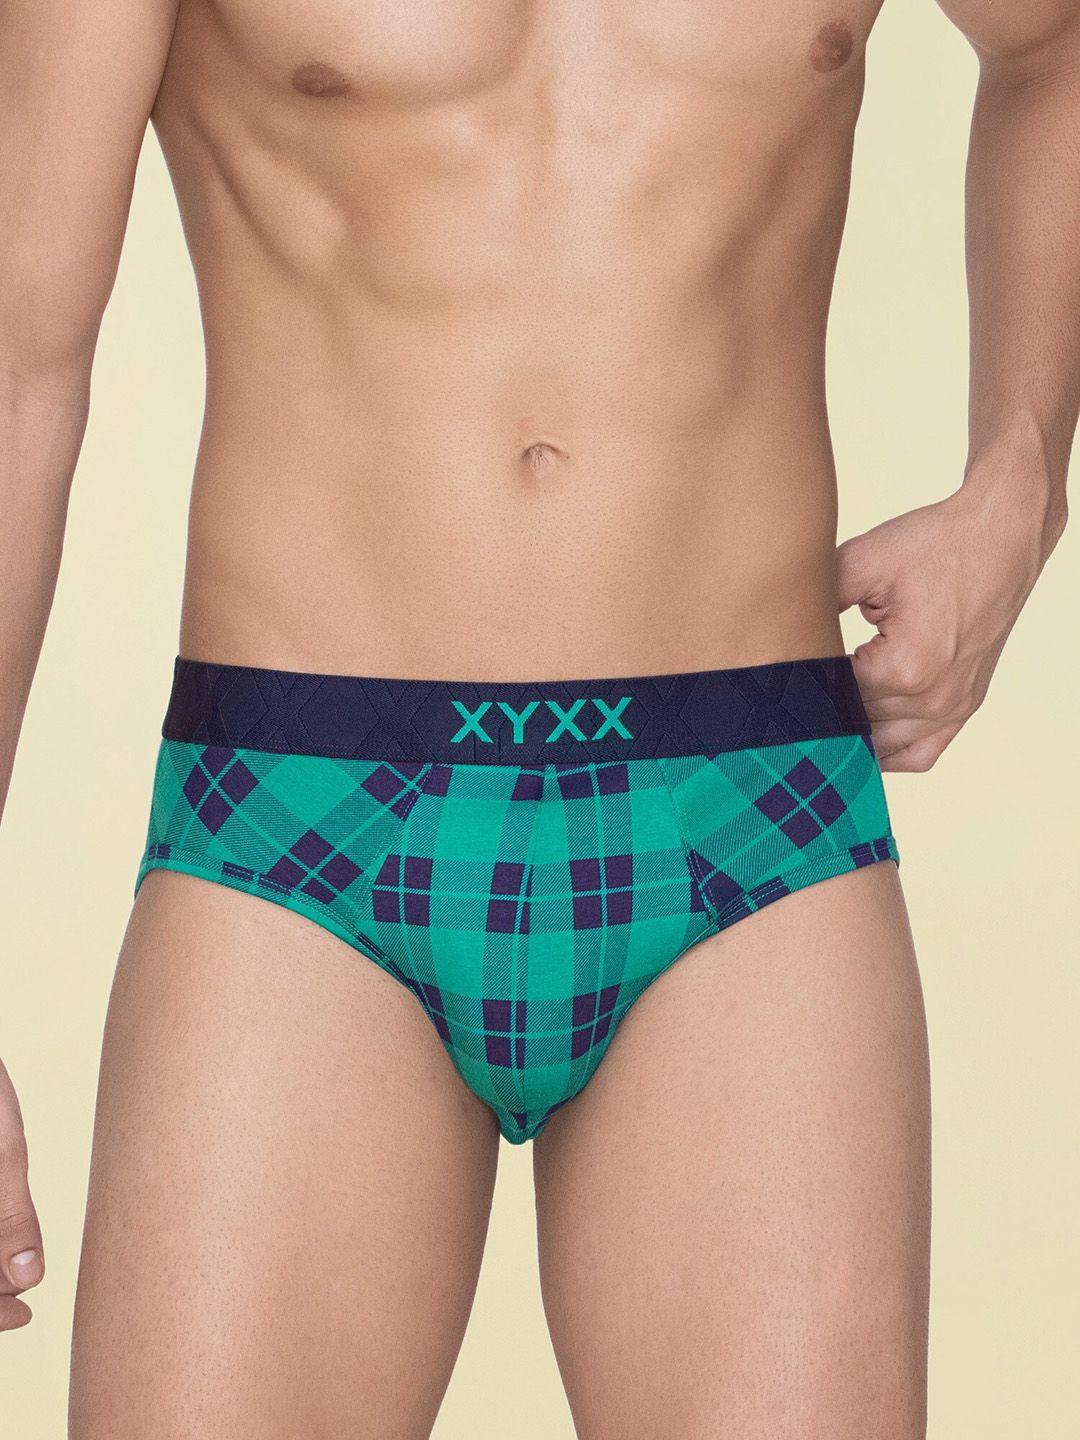 xyxx men checkmate printed briefs xybrf184